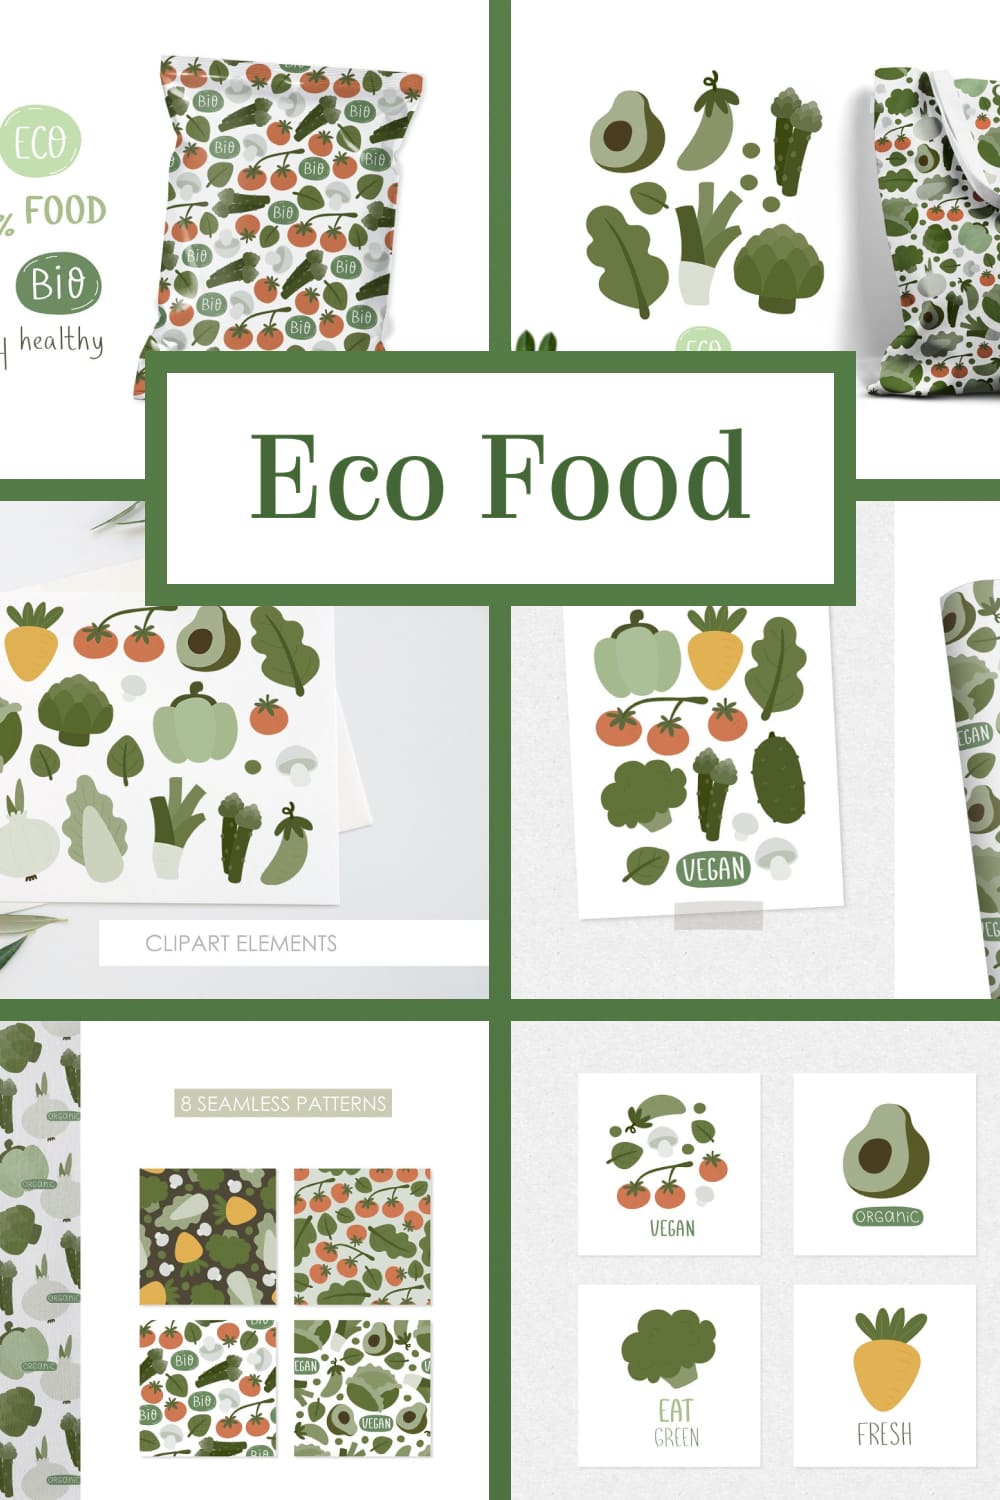 Eco food - pinterest image preview.